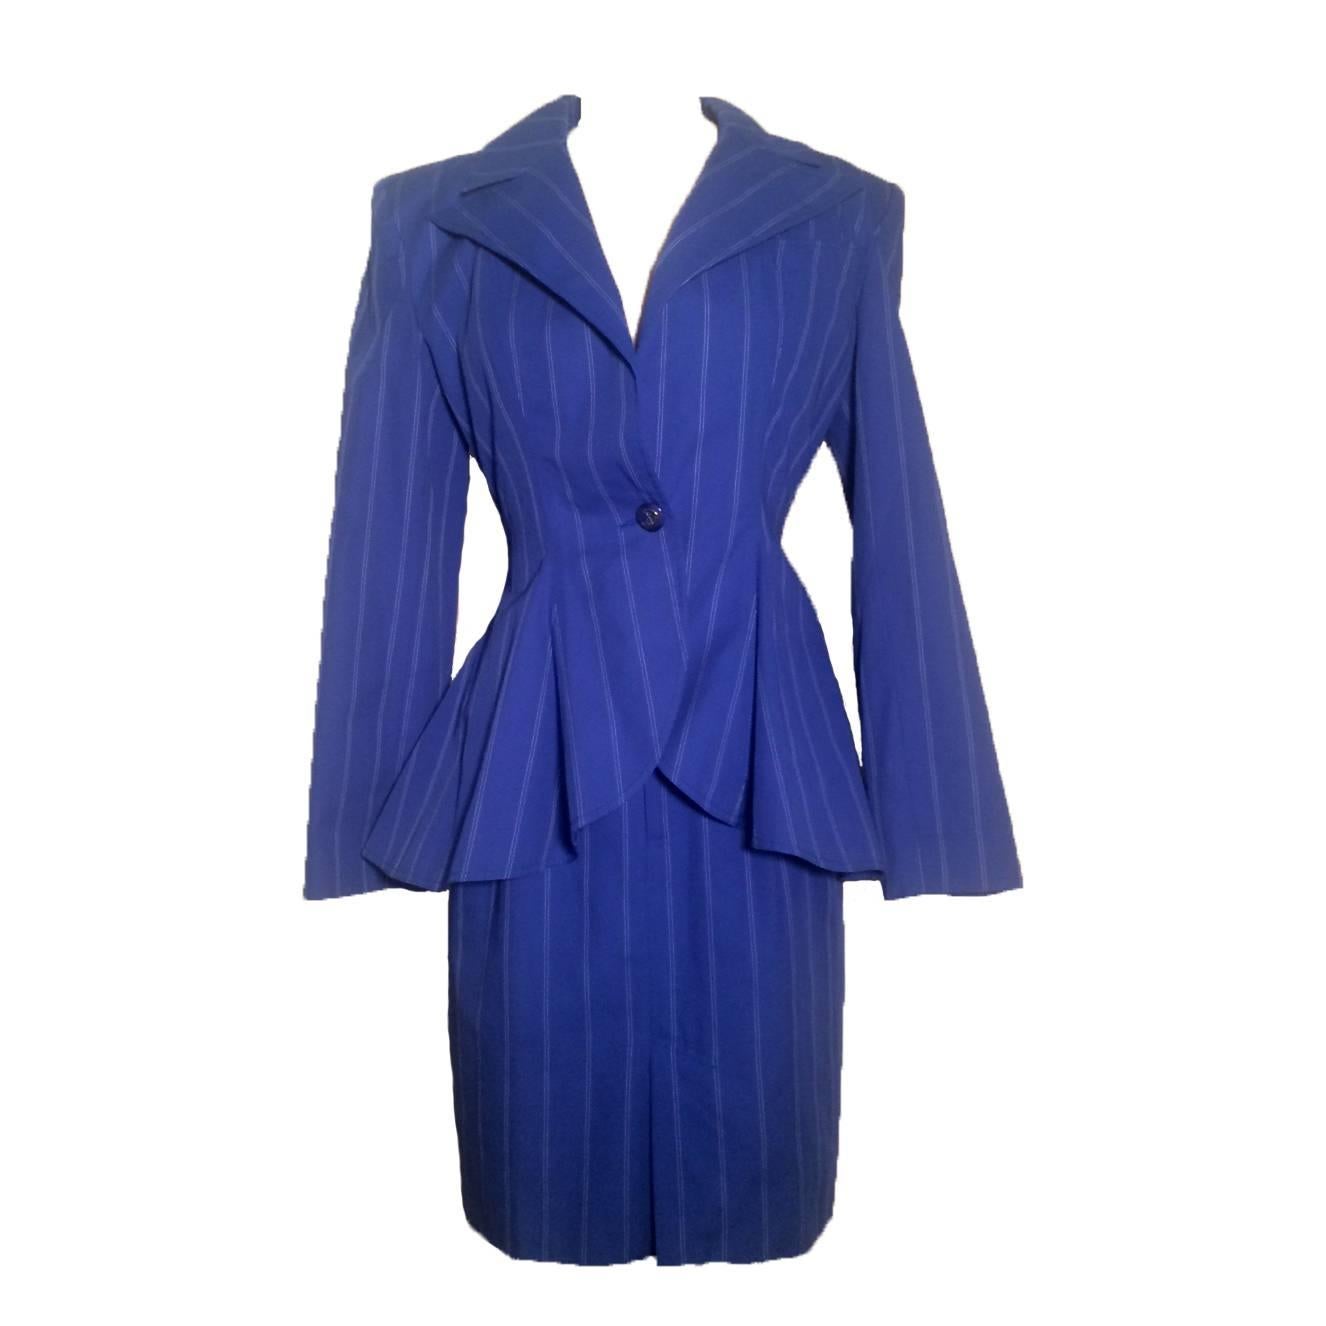 Patrick Kelly 1980s Blue & White Pinstripe Peplum Skirt Suit with Anchor Buttons